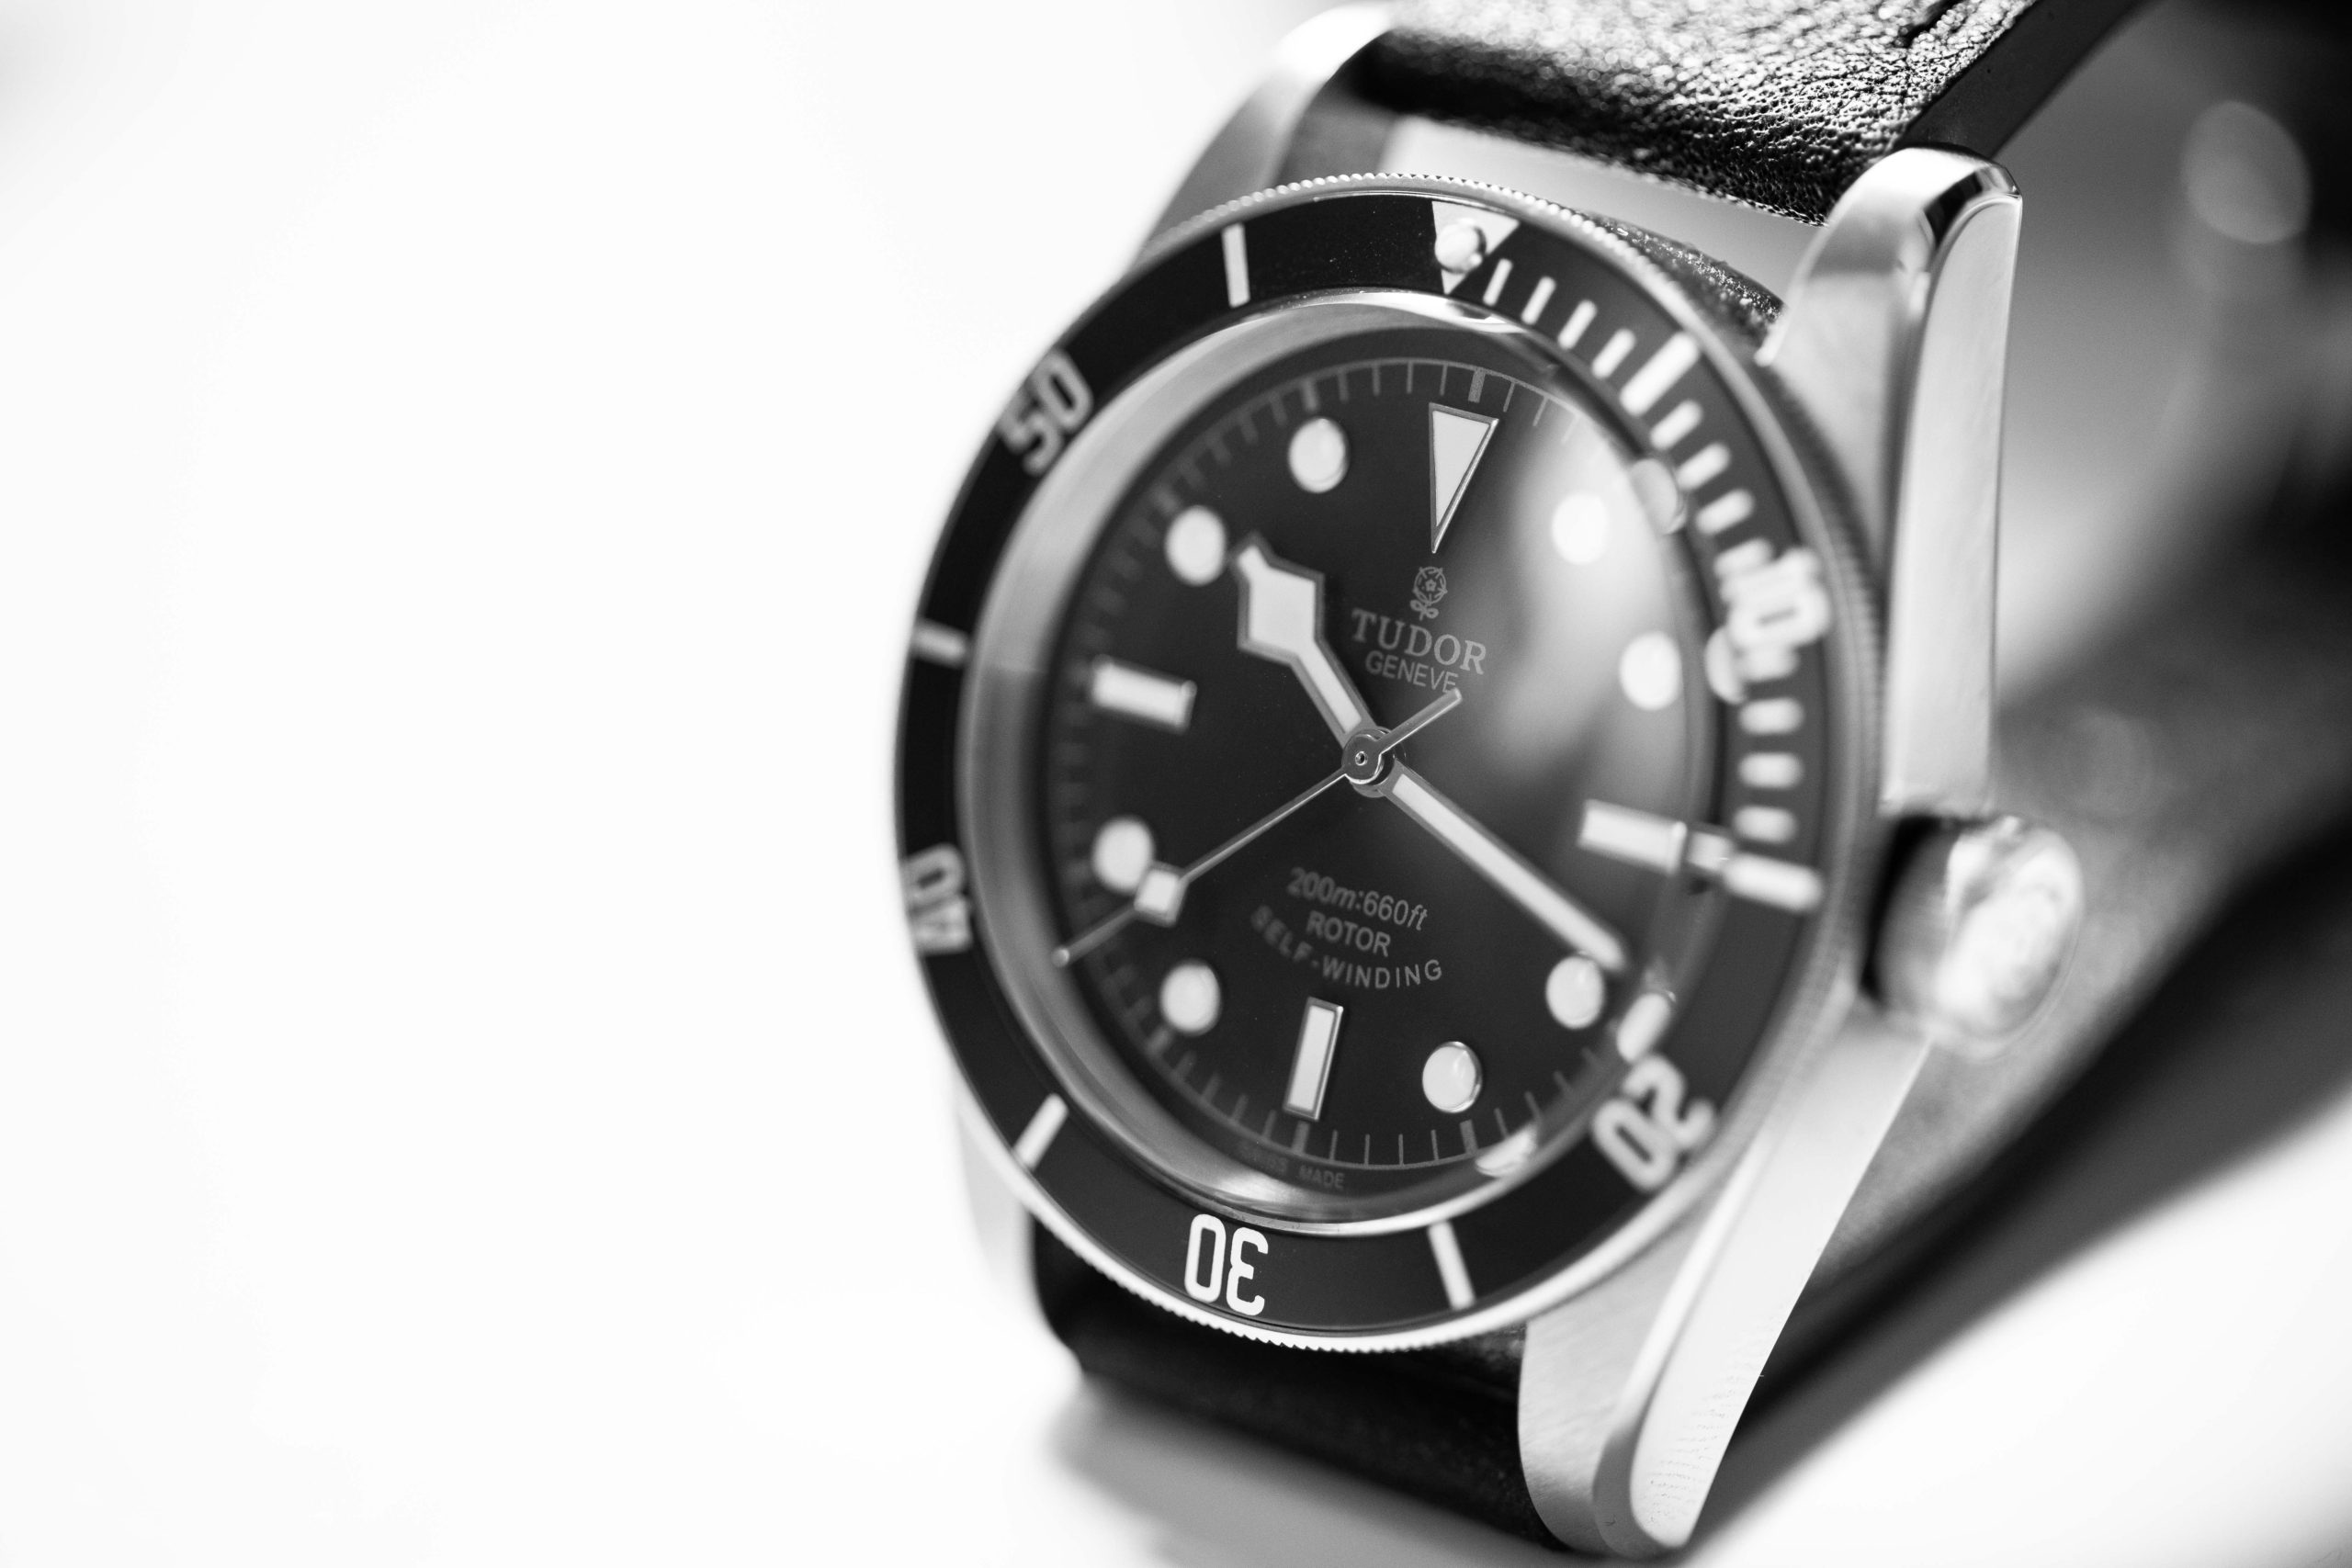 20 Small Wrist Dive Watches: 37mm, 38mm, and 39mm Offerings – The Dive Watch  Blog